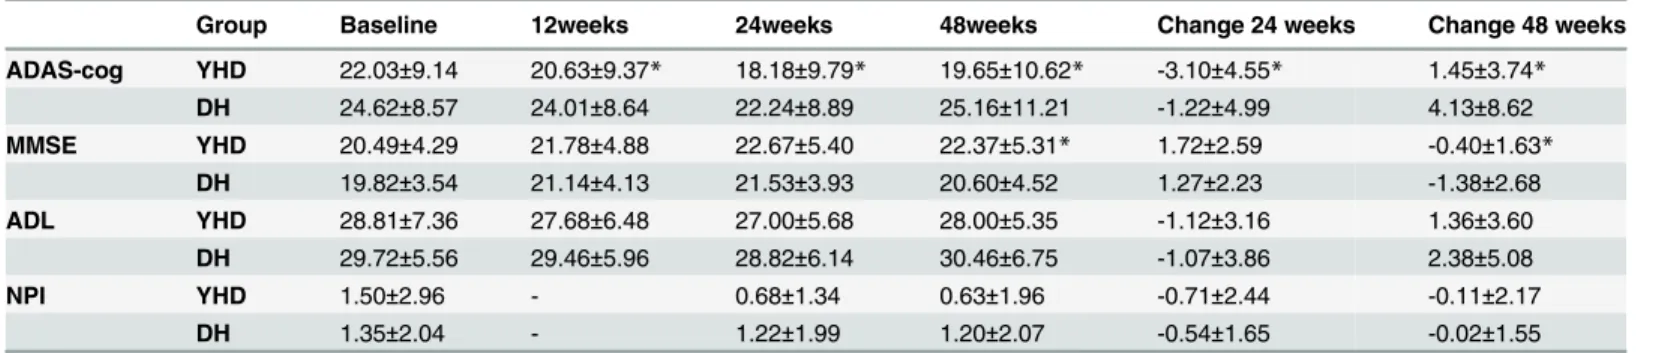 Table 2. Mean efficacy scores at all time points and change at week 24, and 48 (Mean ± SD).